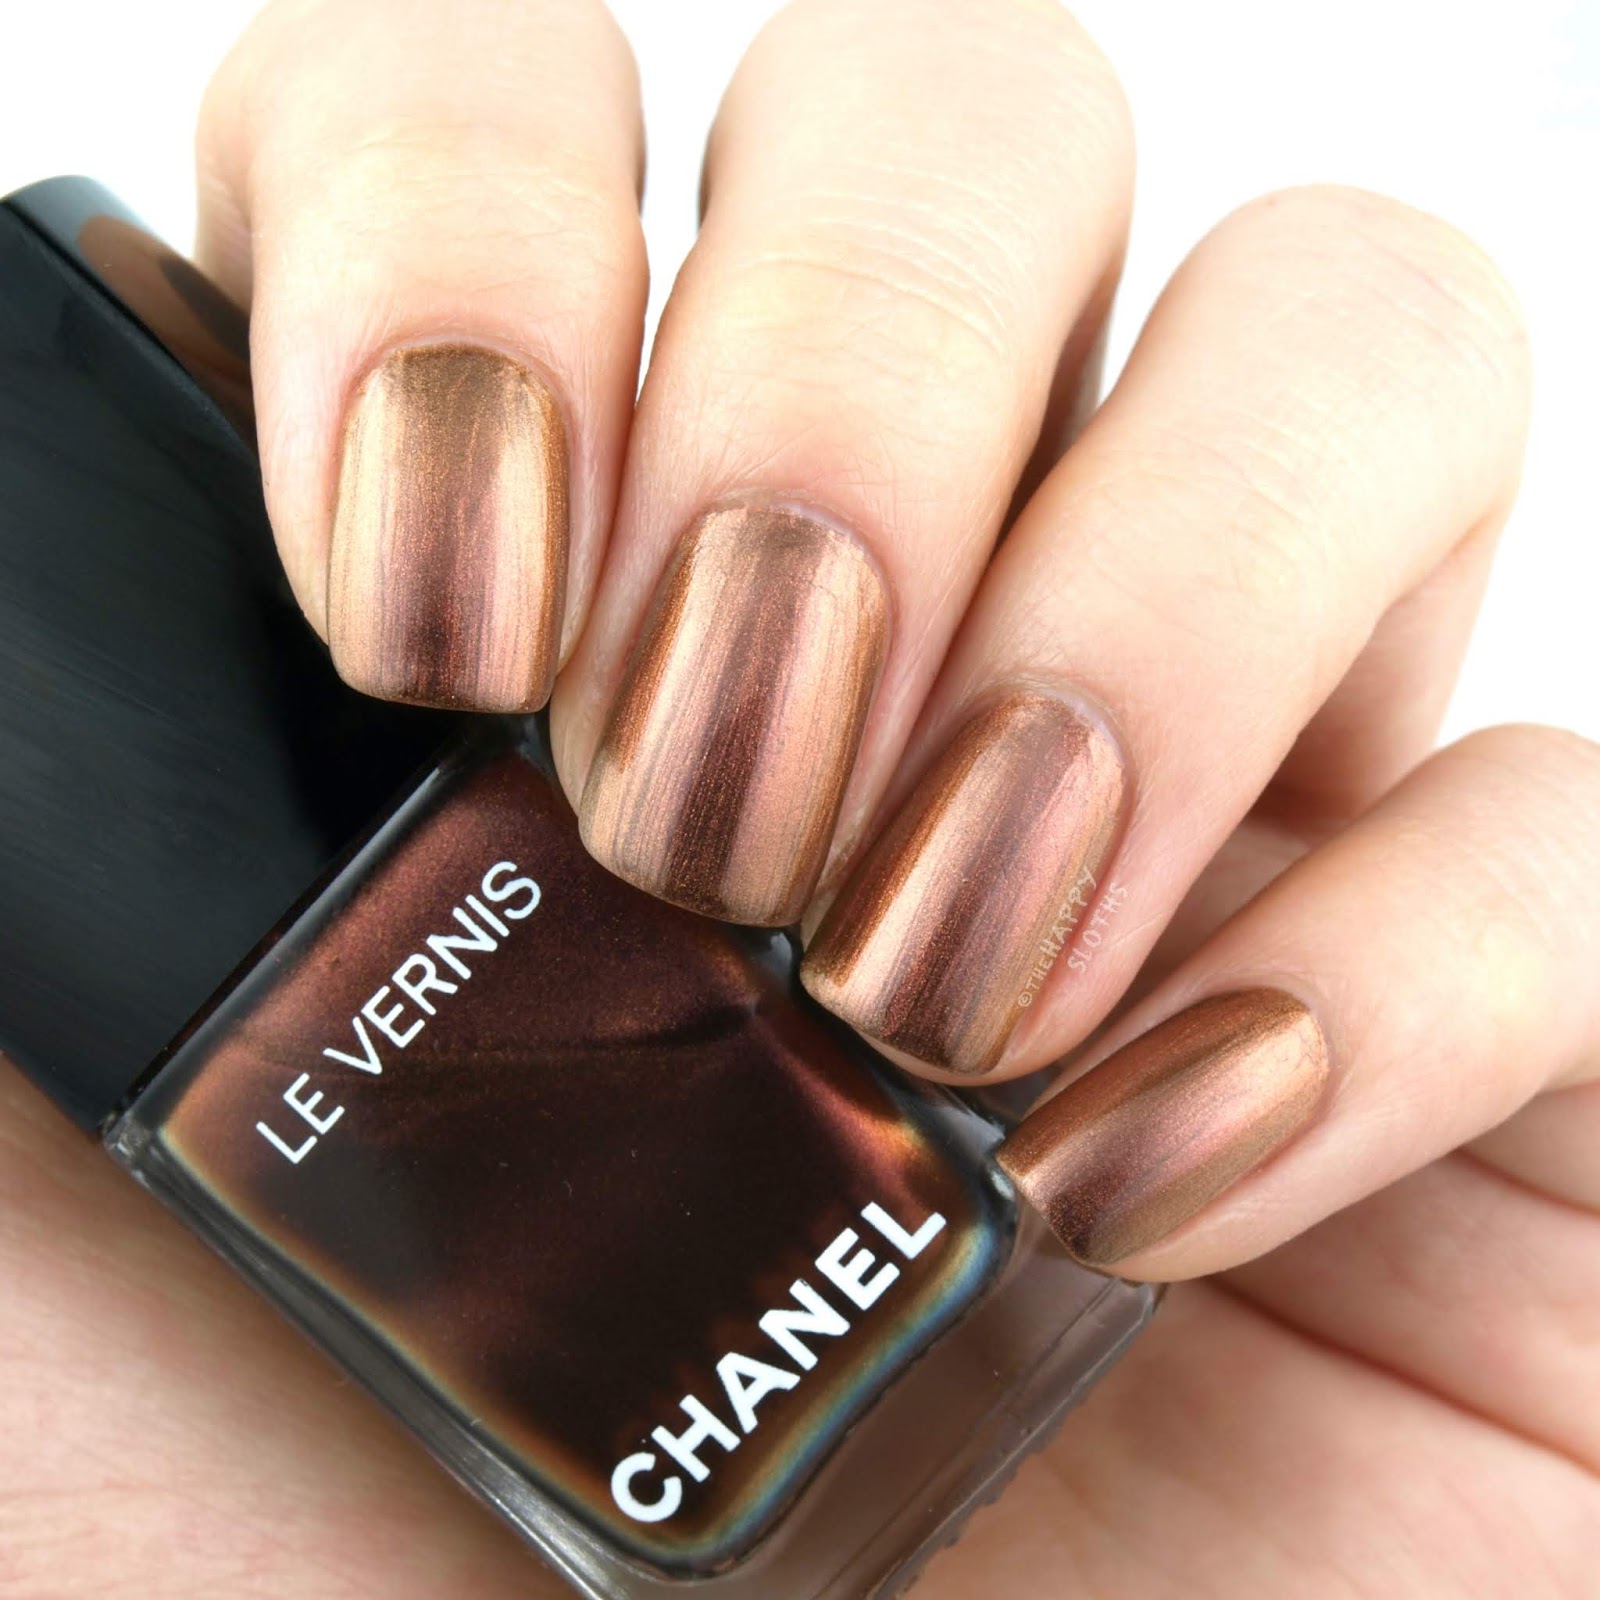 Chanel Holiday 2018 | Le Vernis in "917 Opulence": Review and Swatches